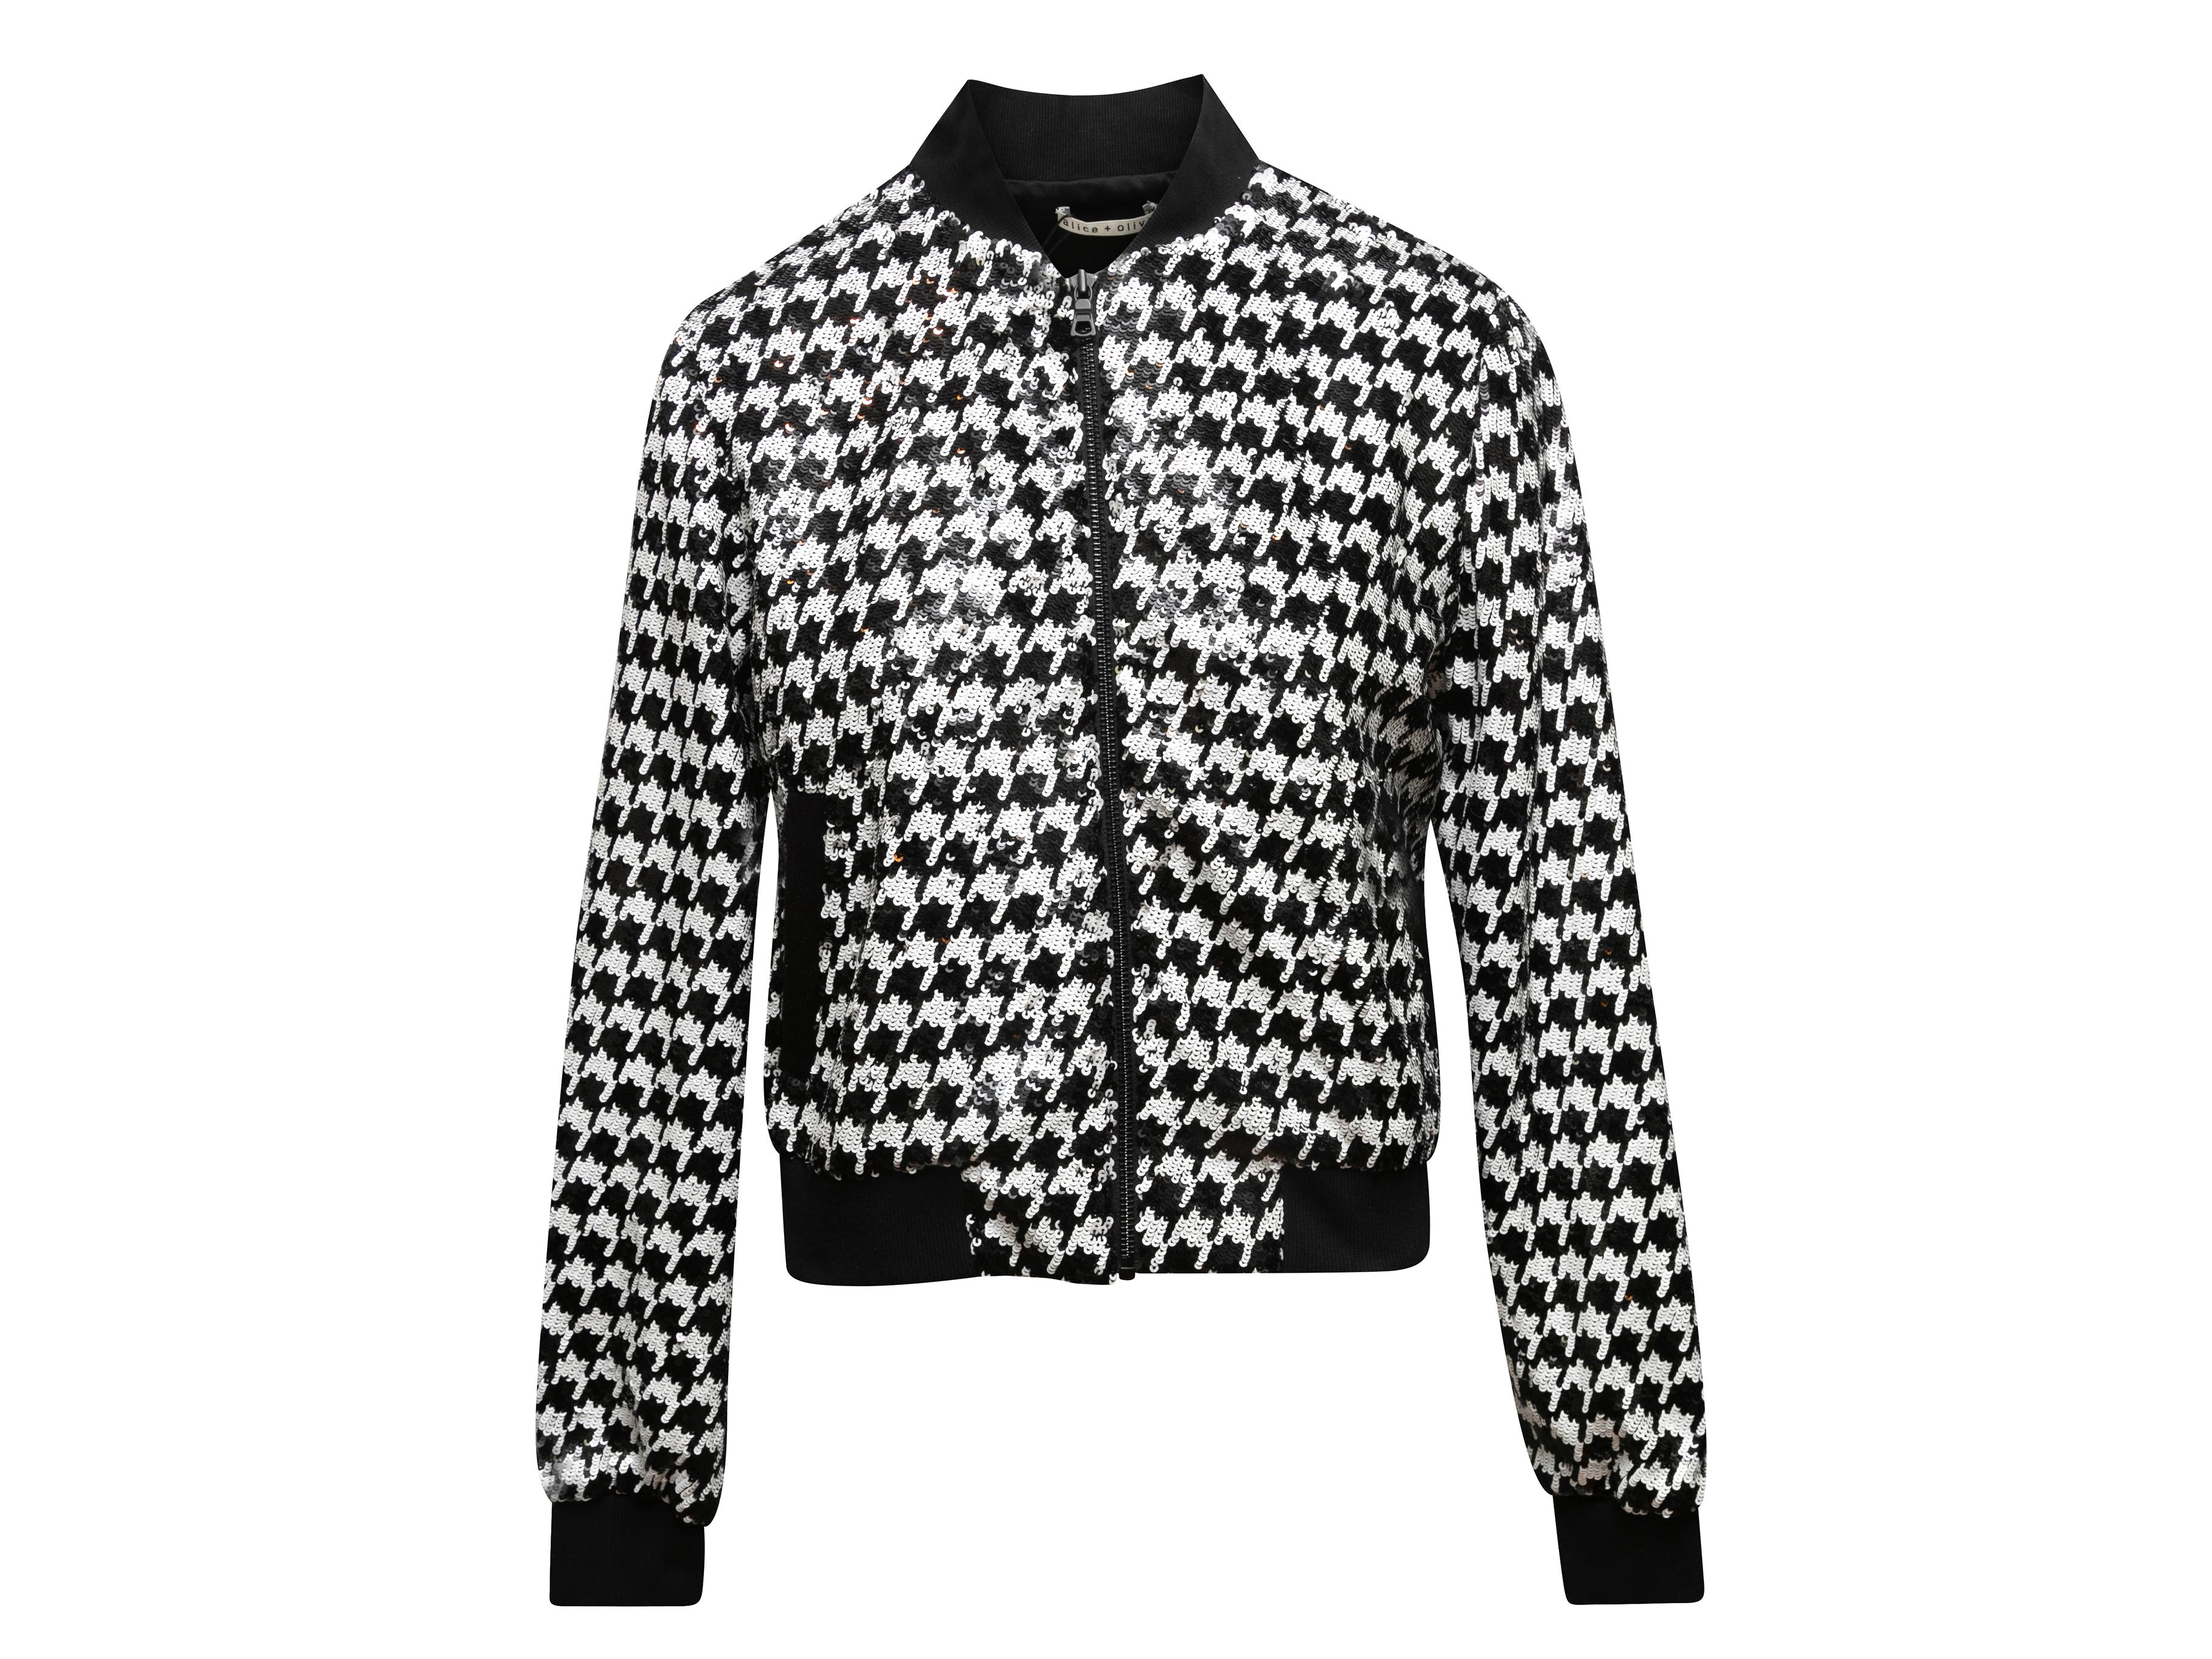 Black and white sequined houndstooth patterned jacket by Alice + Olivia. Dual hip pockets. Zip closure at center front. 38